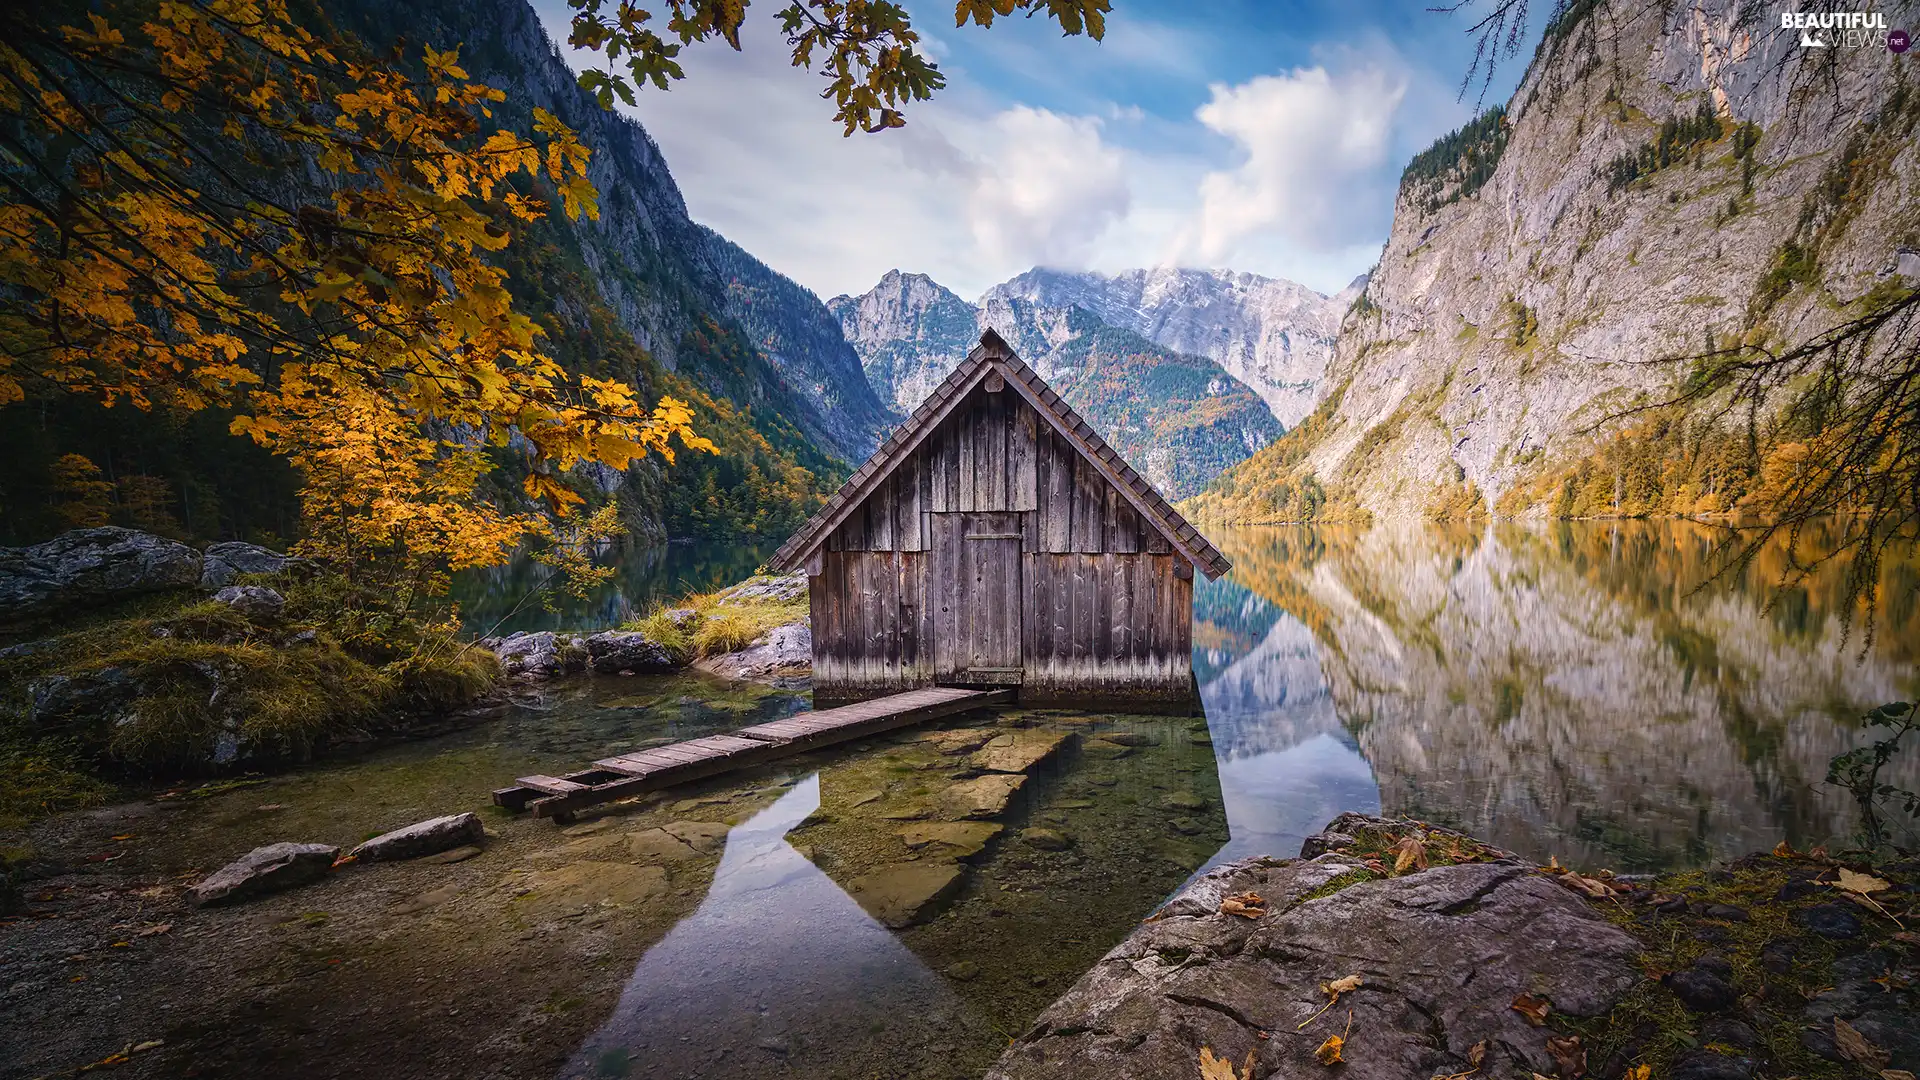 viewes, trees, Wooden, Obersee Lake, house, cottage, Alps Mountains, Germany, autumn, Stones, Berchtesgaden National Park, Bavaria